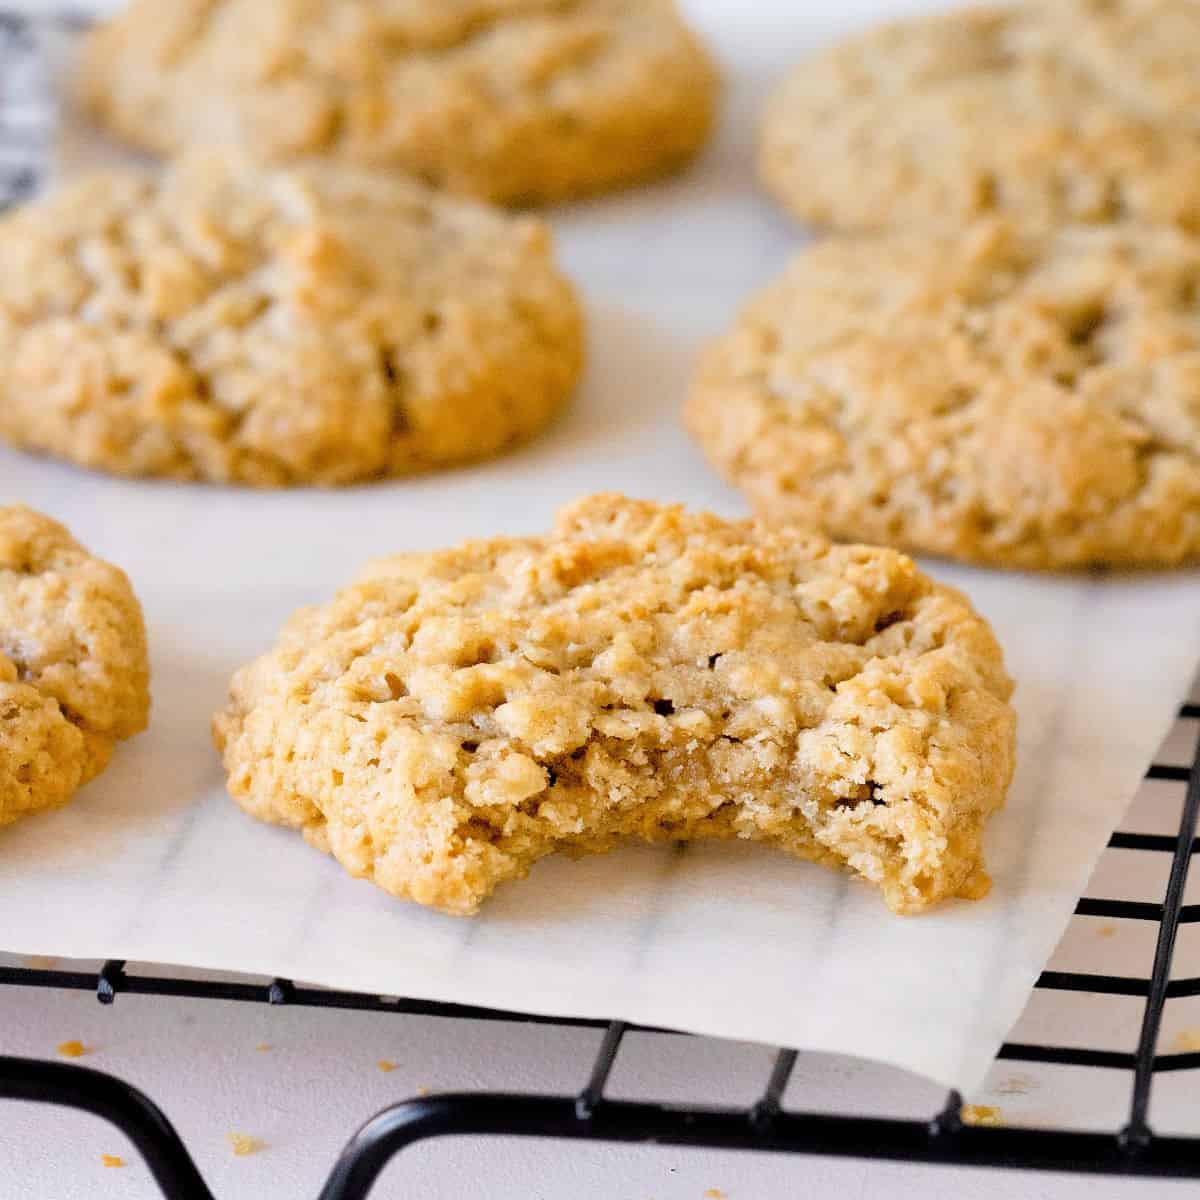 Super Saver - Recipe: Chewy Oatmeal Chocolate Chip Cookies